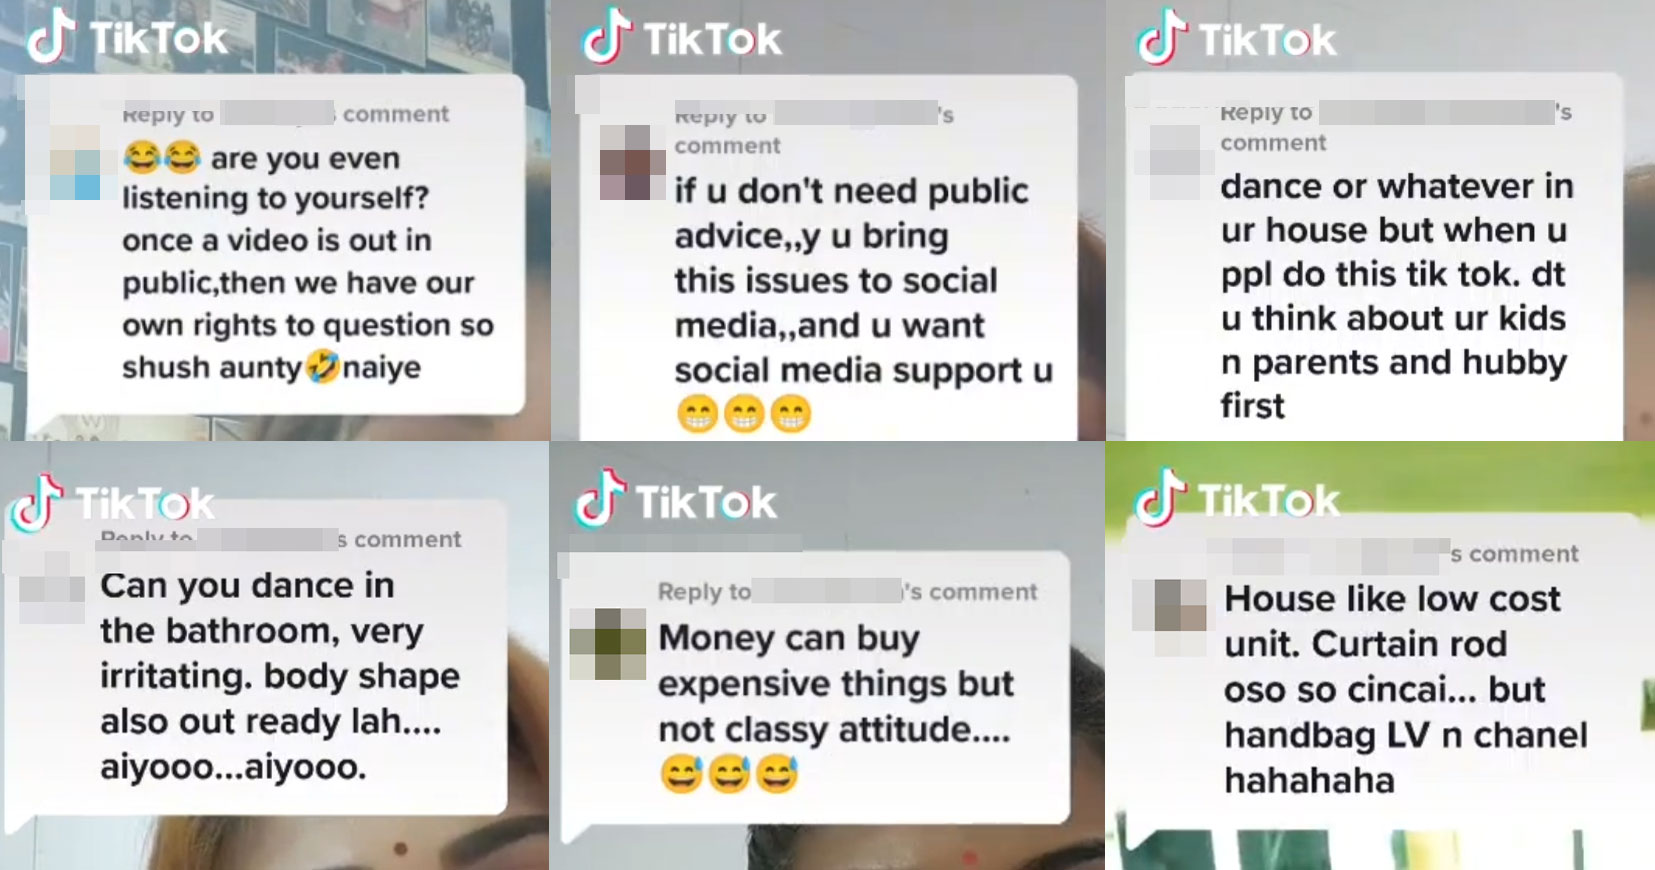 Mother of 3 allegedly ends her life after receiving hate comments on tiktok account